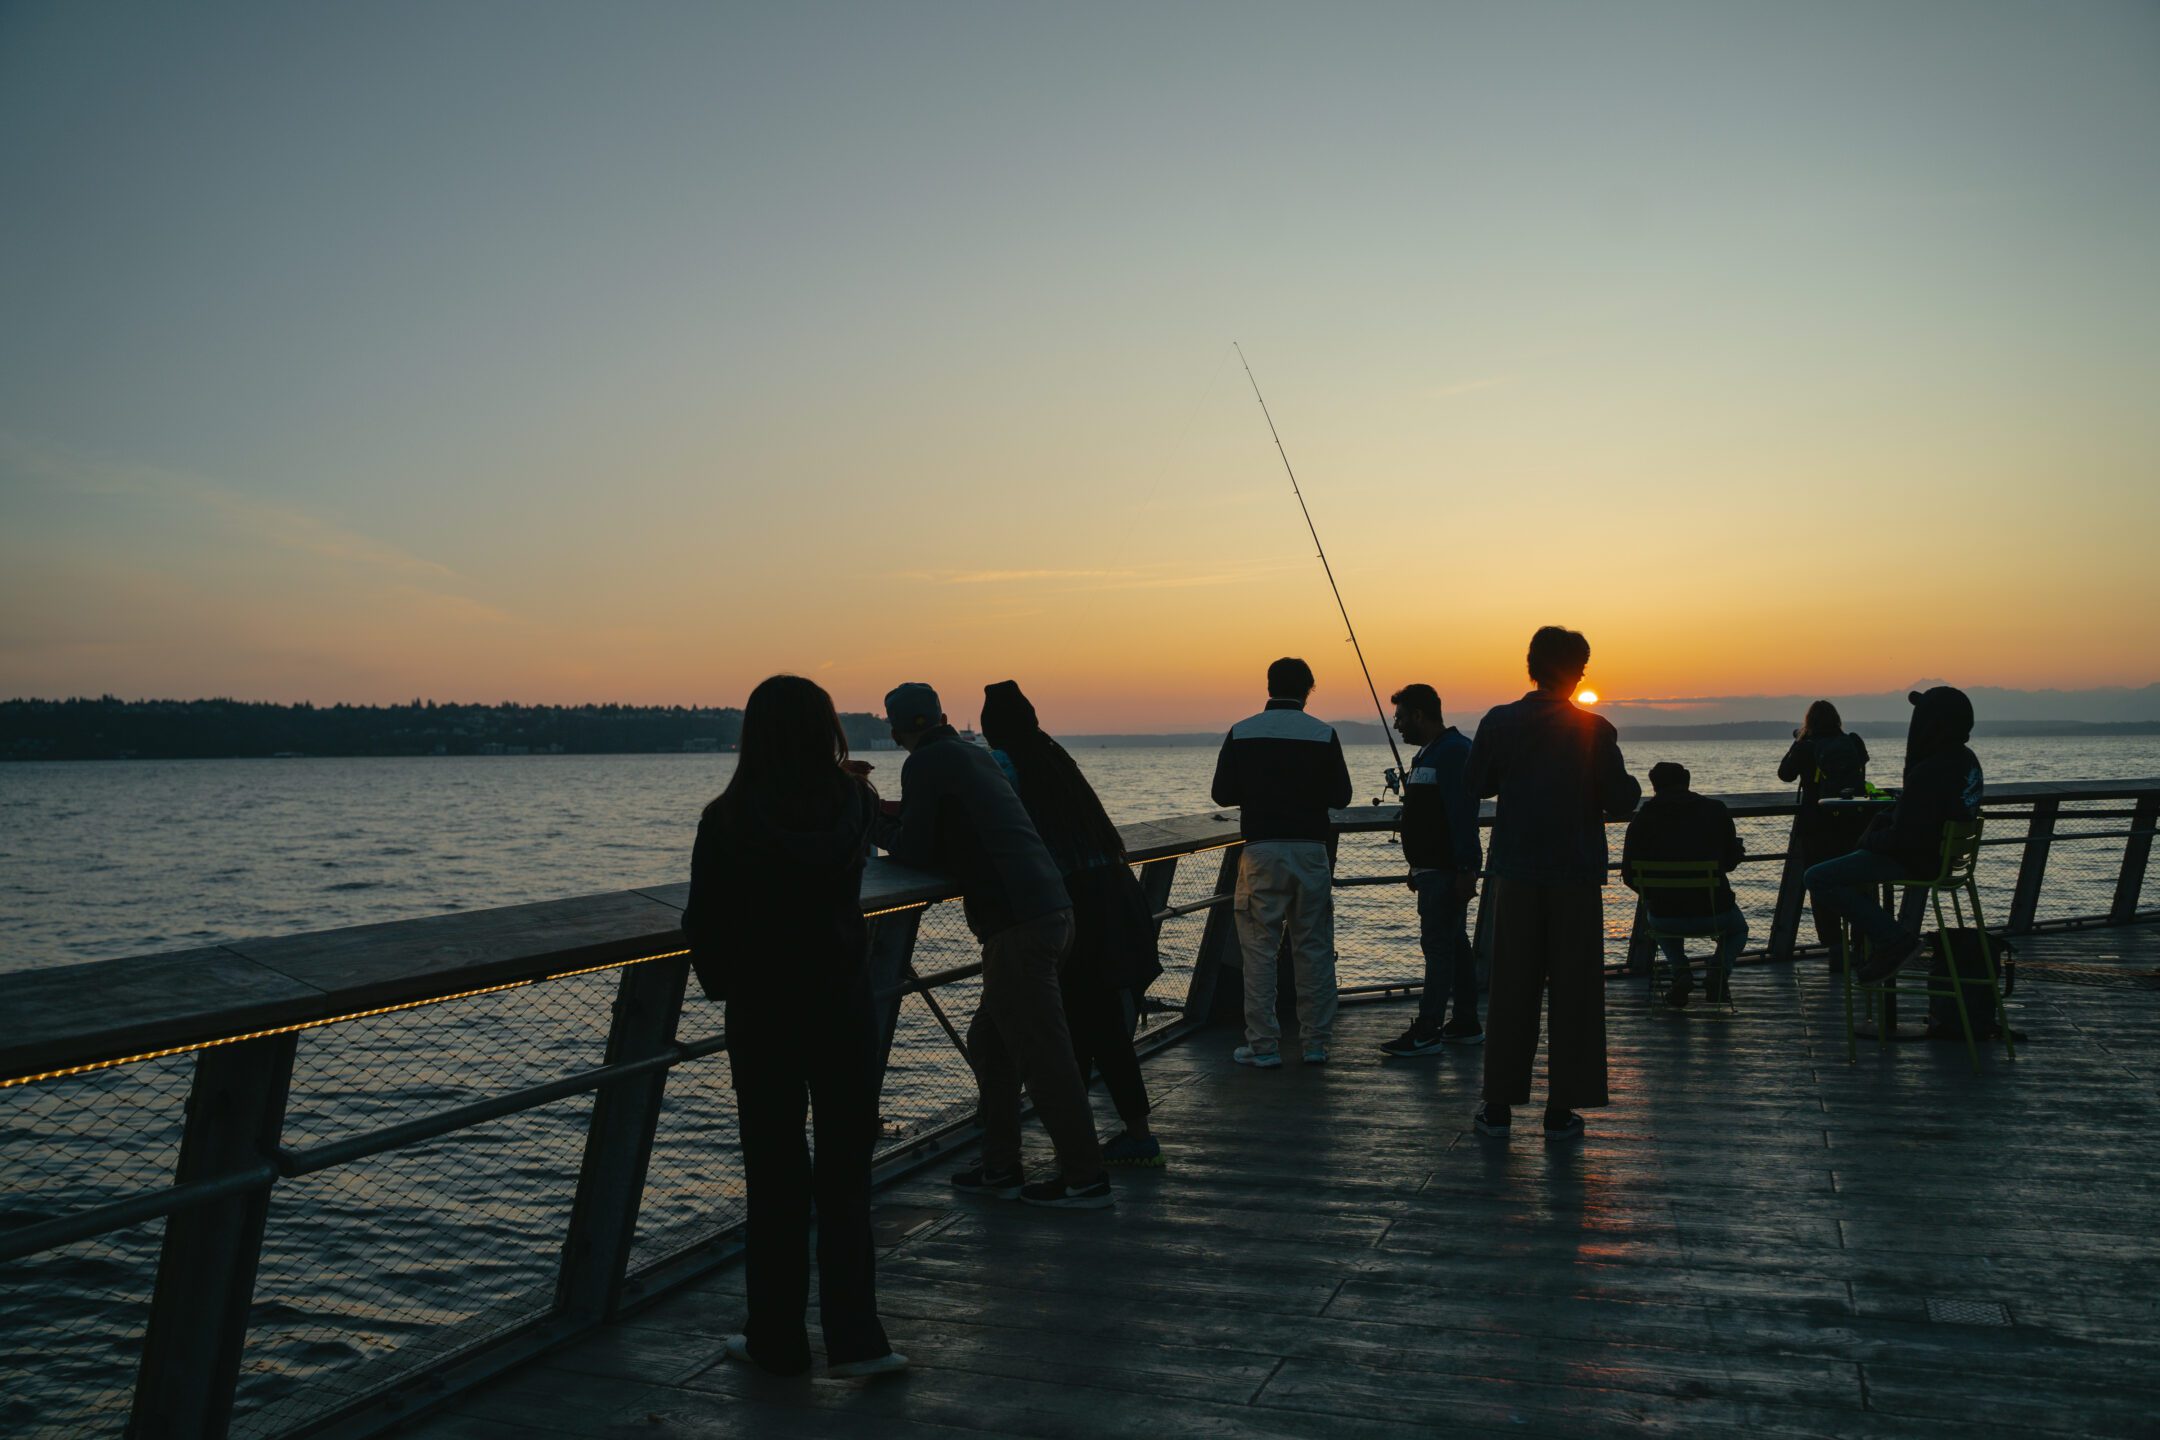 Multiple people leaning over railing at Pier 62. One figure is carrying a fishing rod. The sun is setting over the horizon in the background.